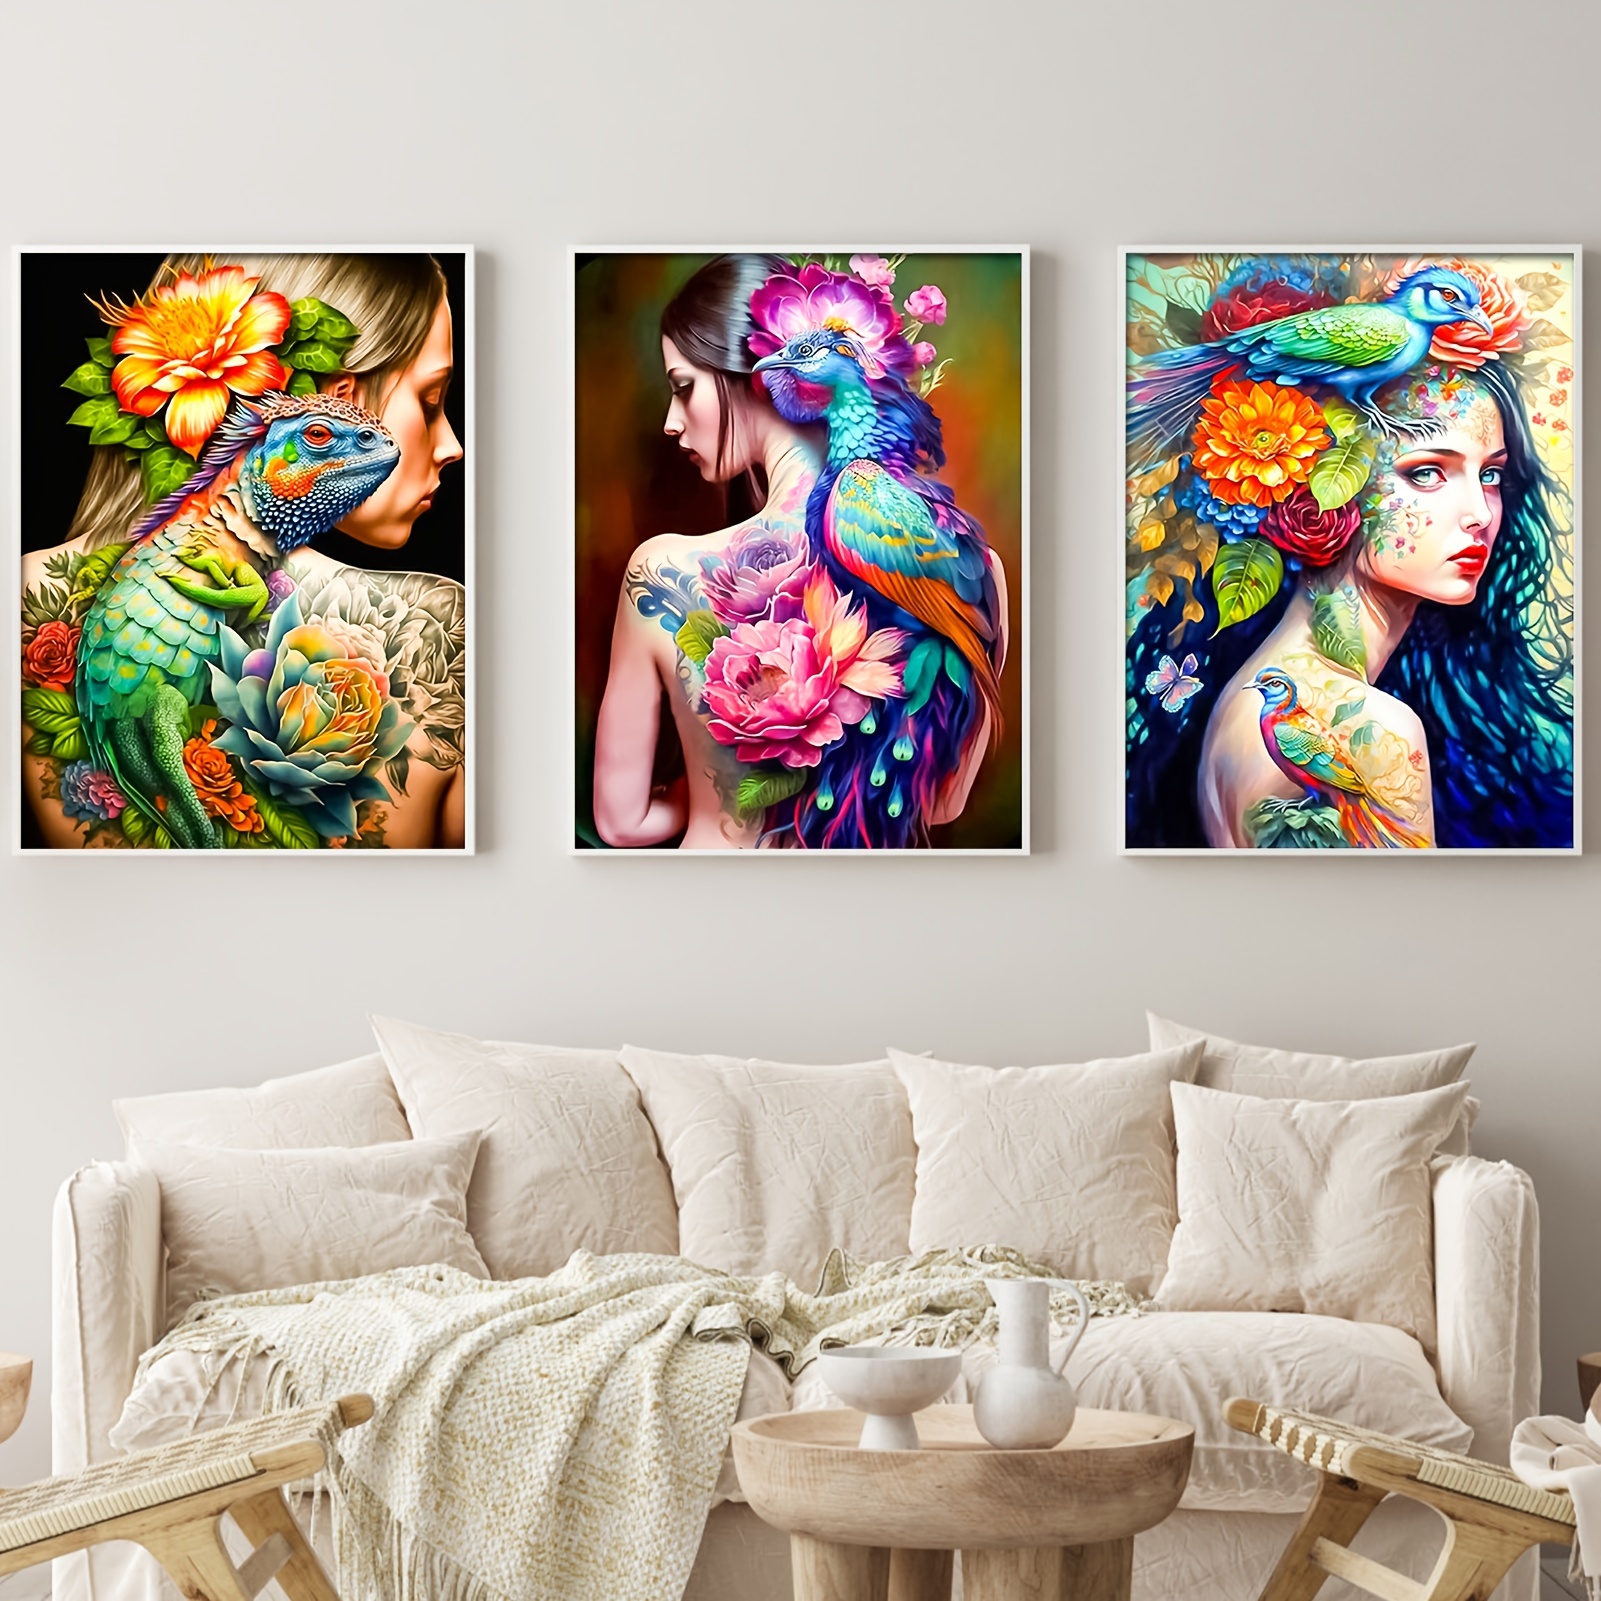  DIY Painting by Numbers for Adults,Women Tattoos Paint by  Number on Canvas Easy to Paint for Beginner Flower Tattoos Paint with  Pigment and Brushes Artwork for Home Decor Without Frame 16''X20'' 